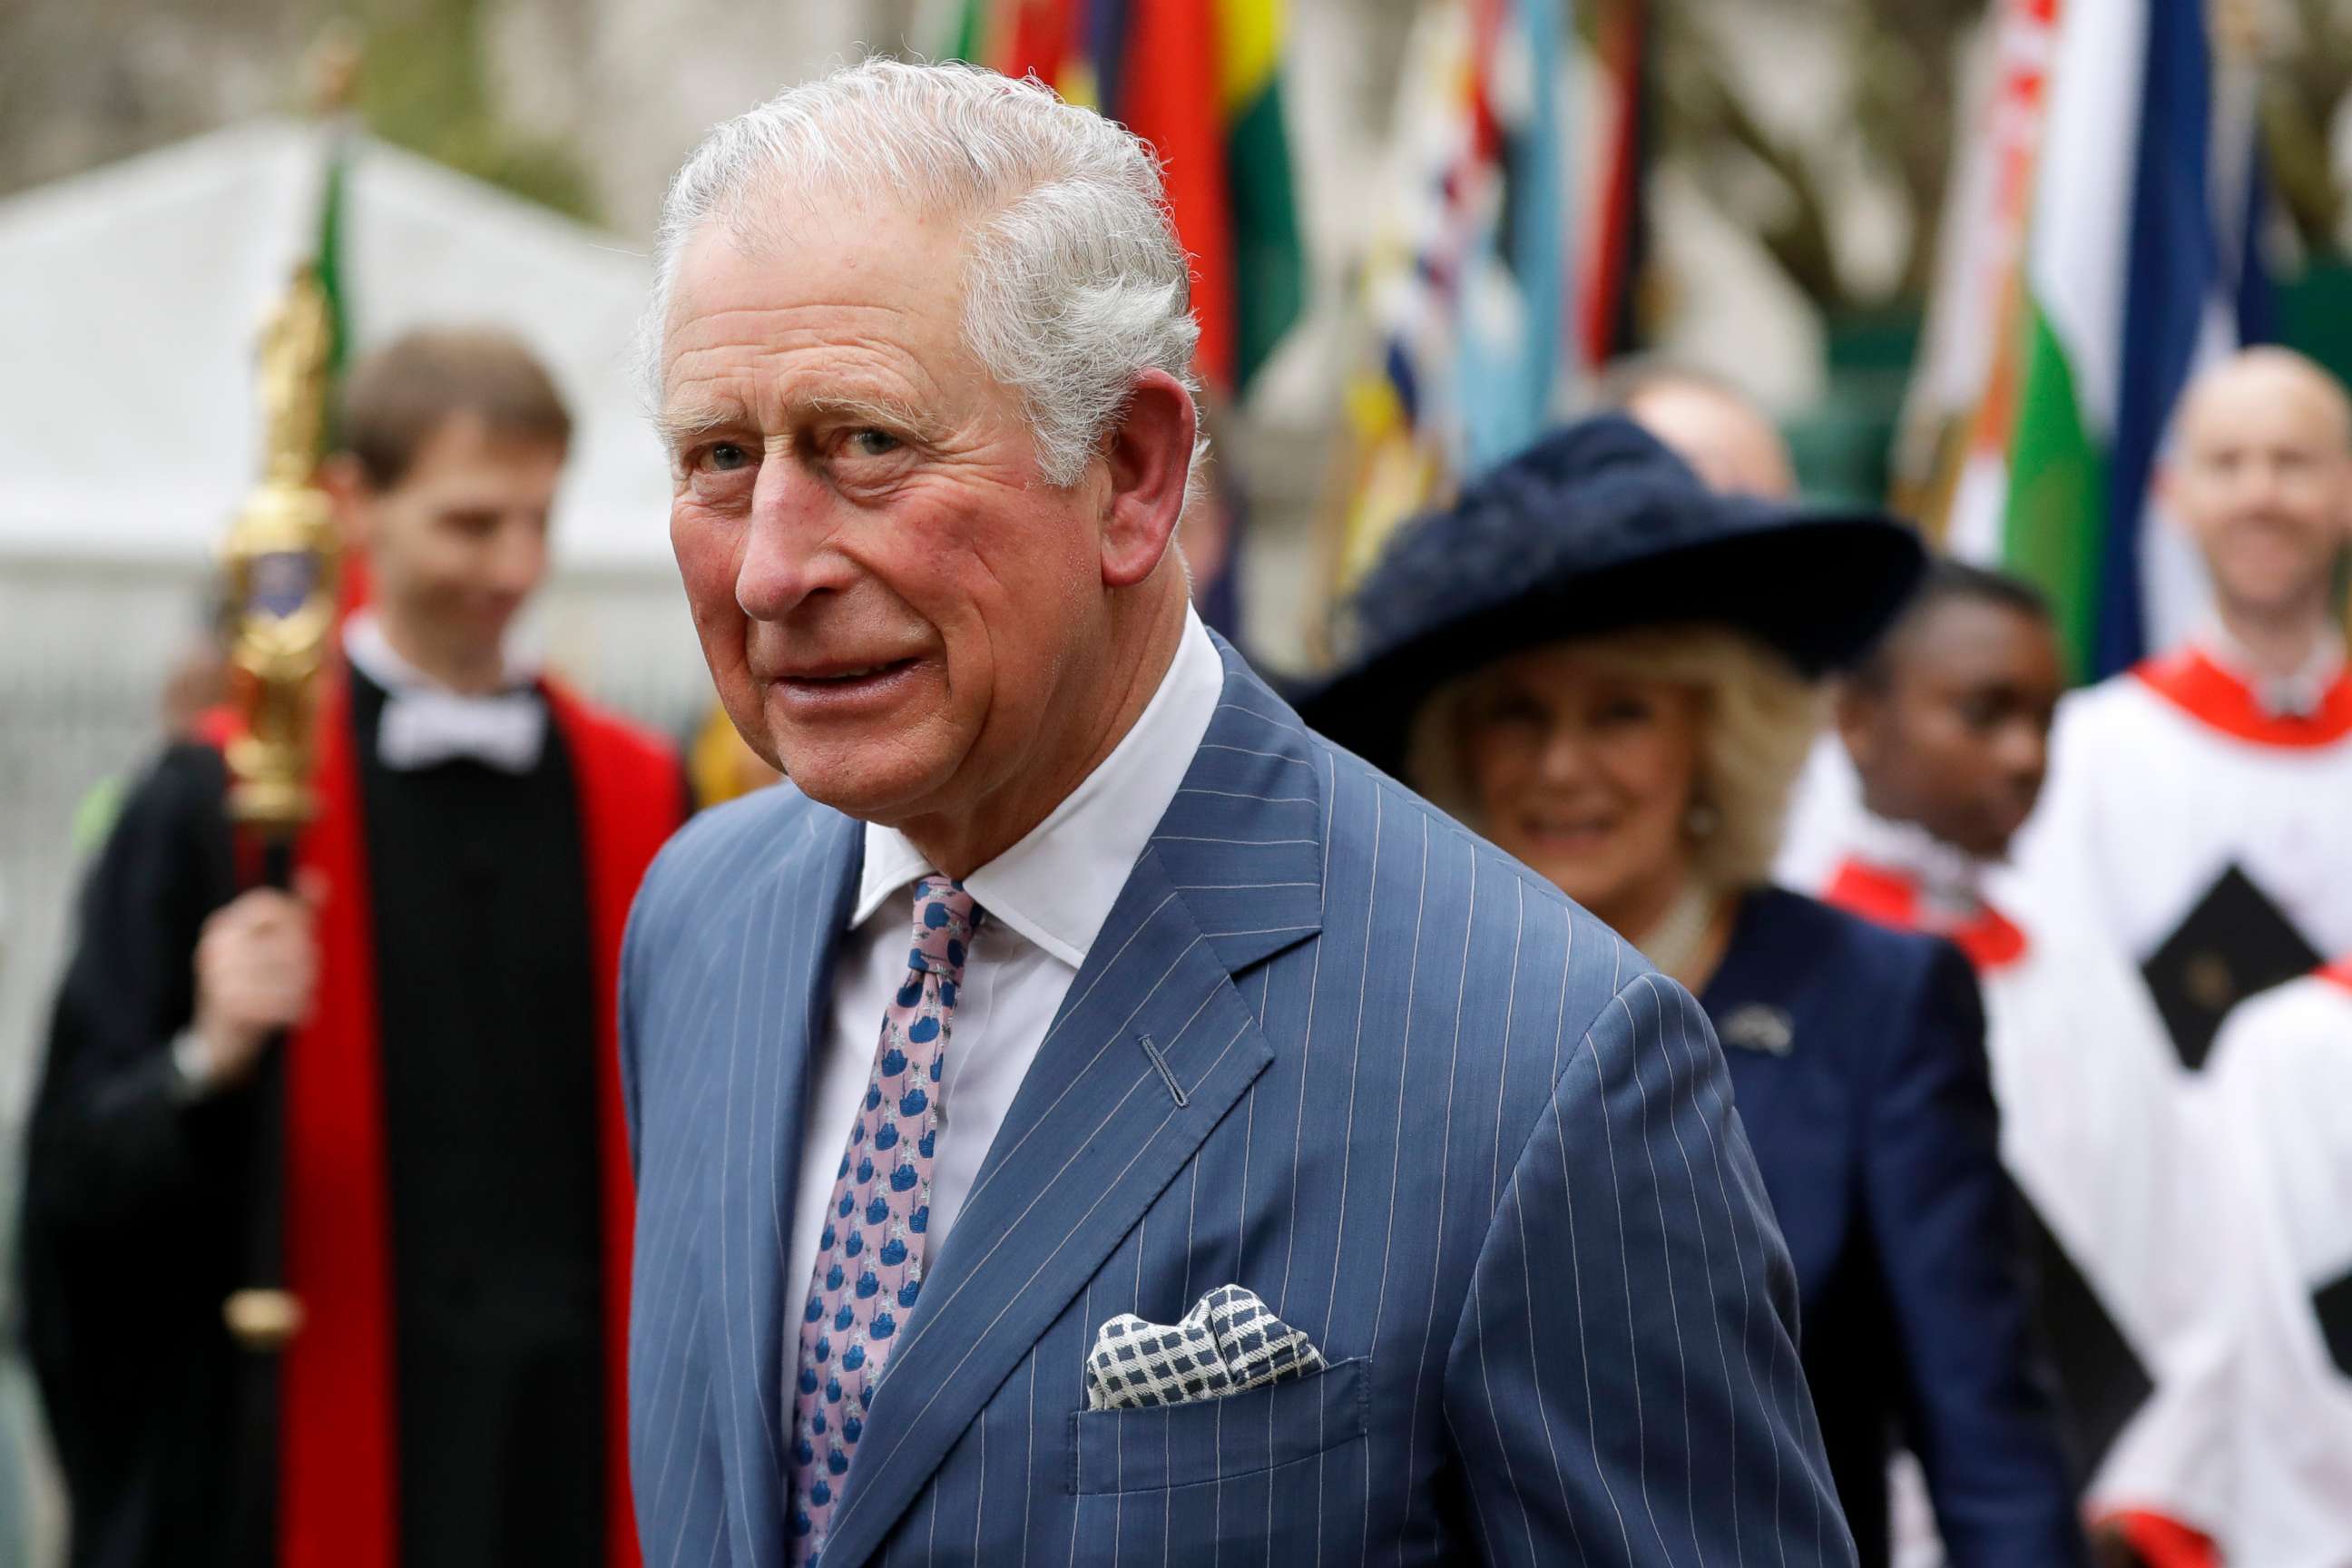 PHOTO: In this Monday, March 9, 2020 file photo, Britain's Prince Charles and Camilla the Duchess of Cornwall, in the background, leave after attending the annual Commonwealth Day service at Westminster Abbey in London, Monday, March 9, 2020.